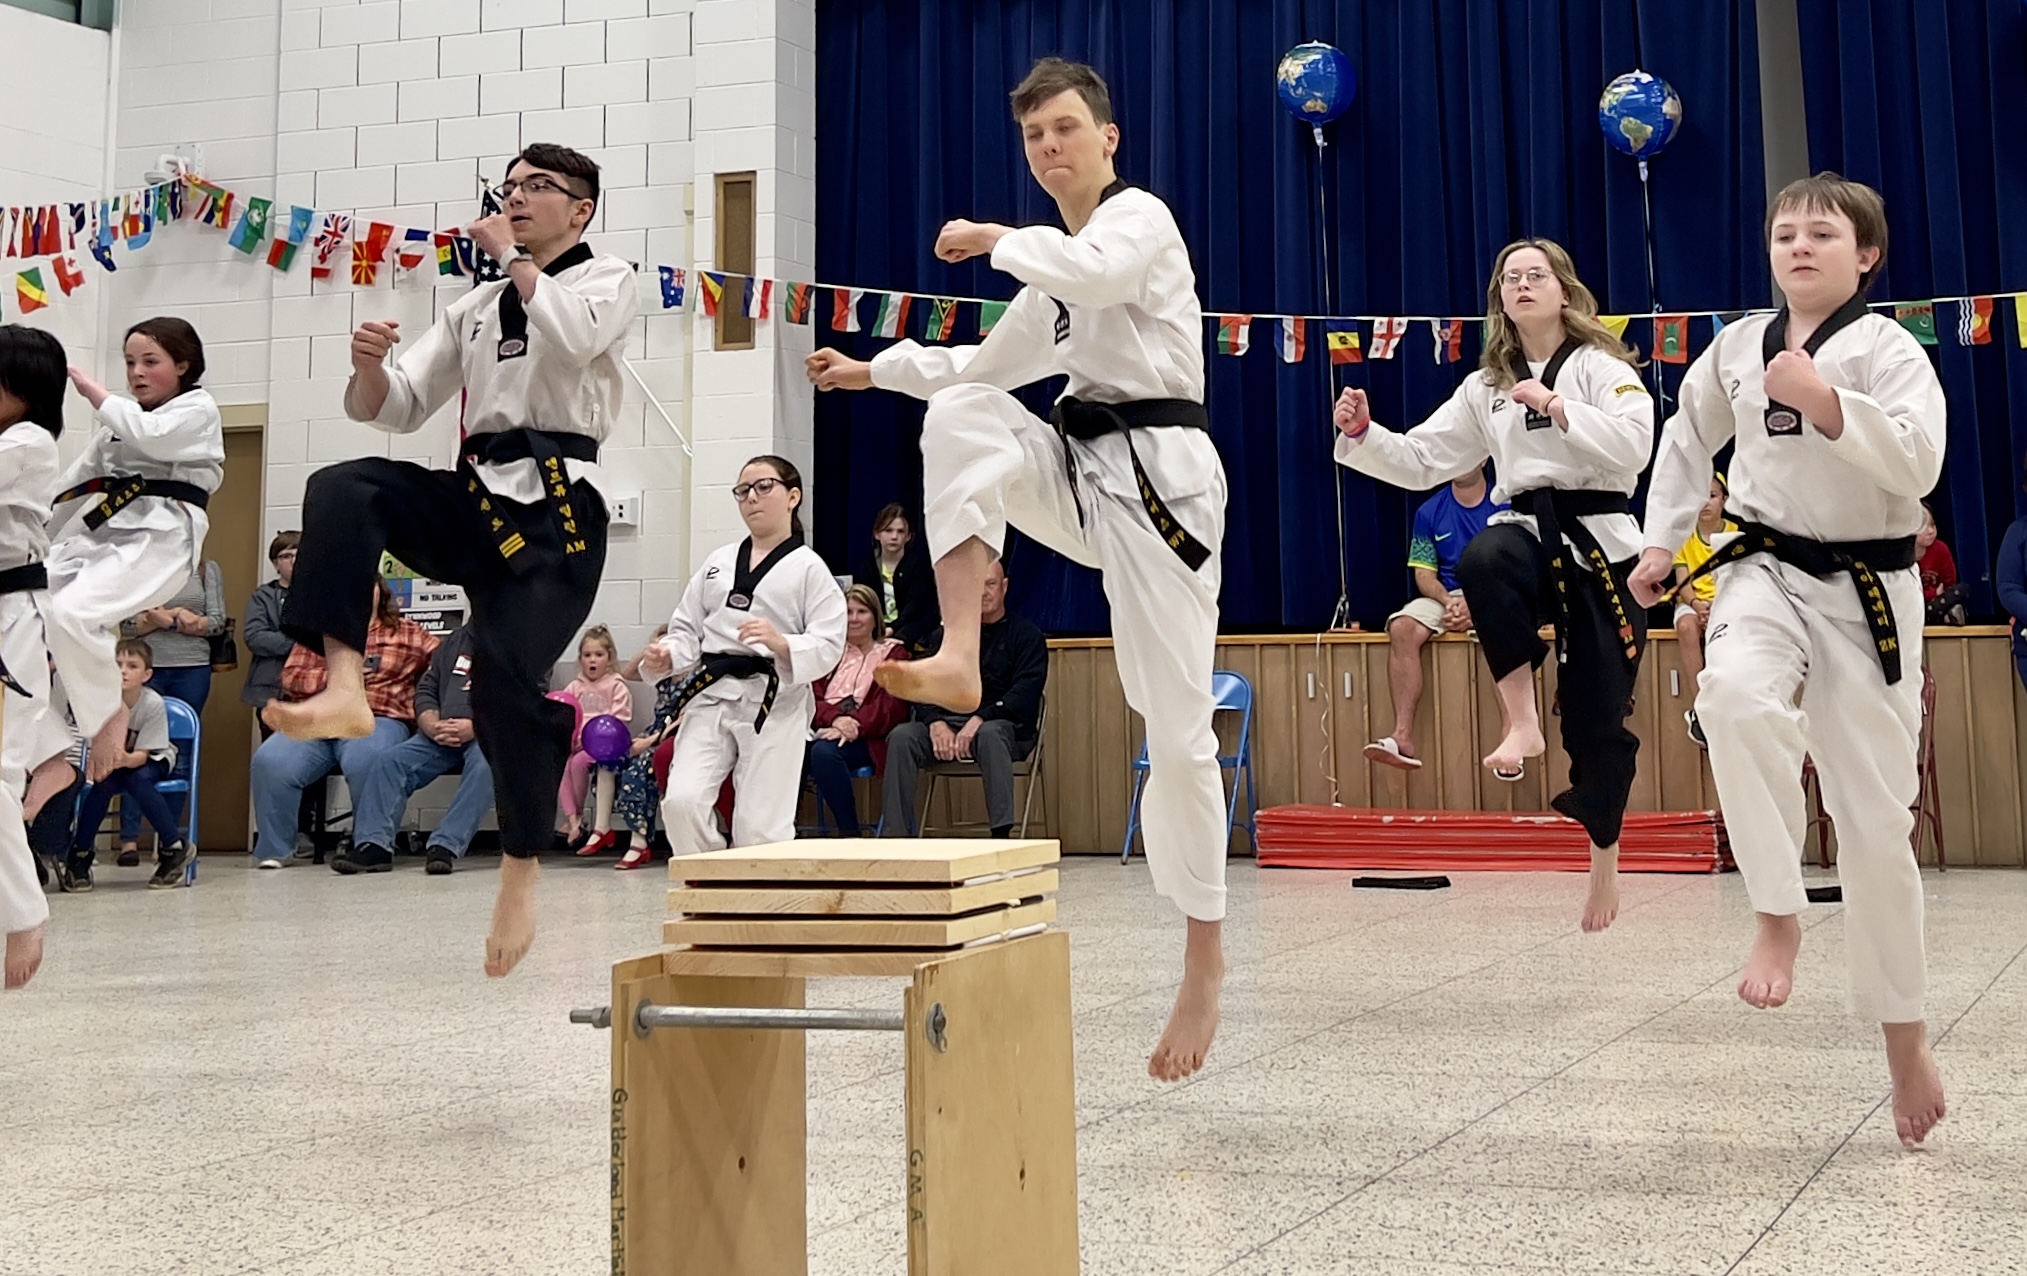 A group of people wearing white traditional clothes perform jujitsu at the LES International Night event.